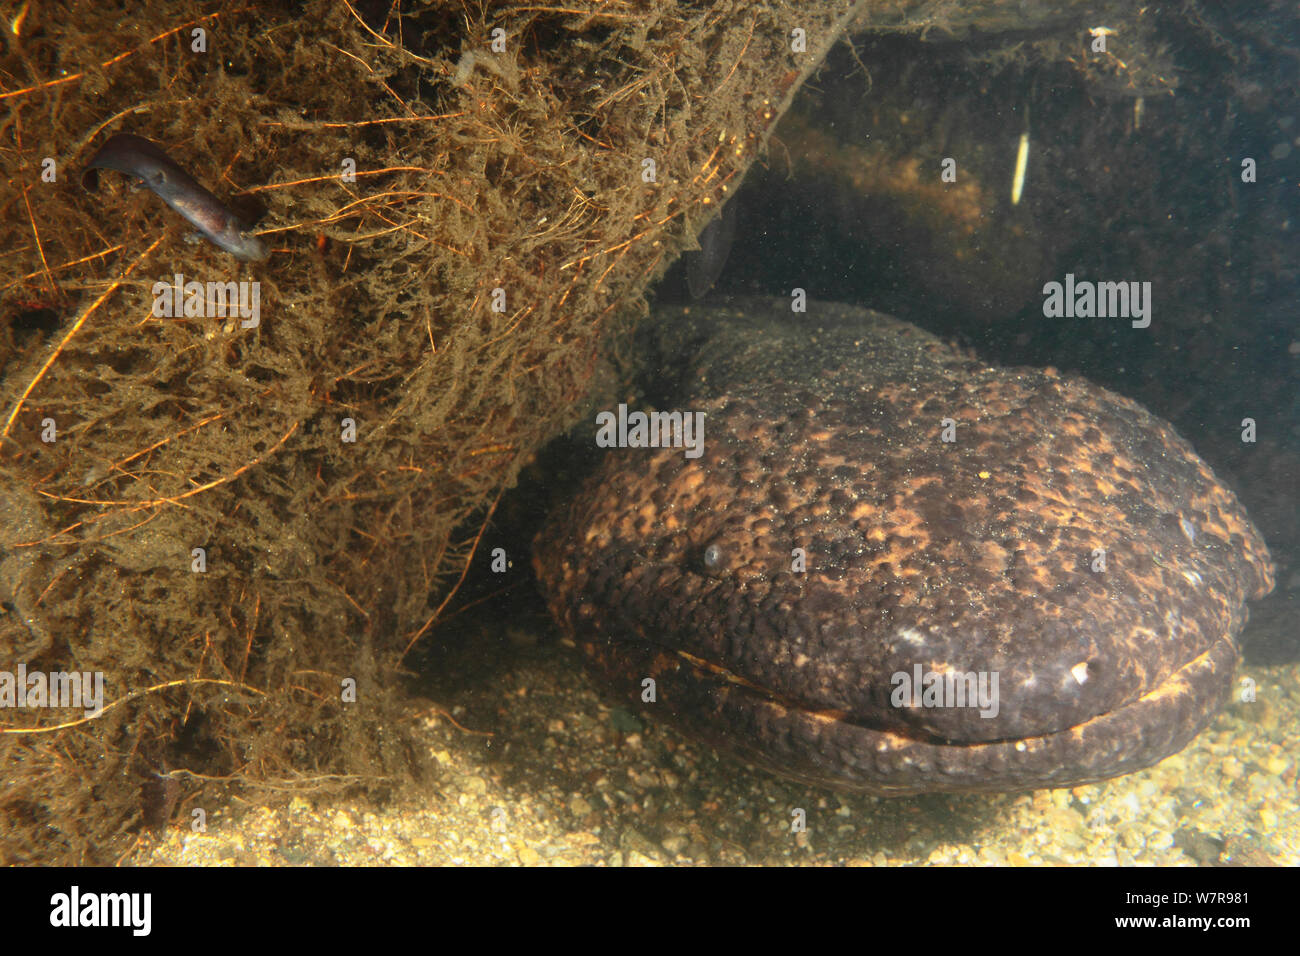 Japanese giant salamander (Andrias japonicus) with larvae which has just left the nest, Hino-river Tottori-ken Japan, March Stock Photo